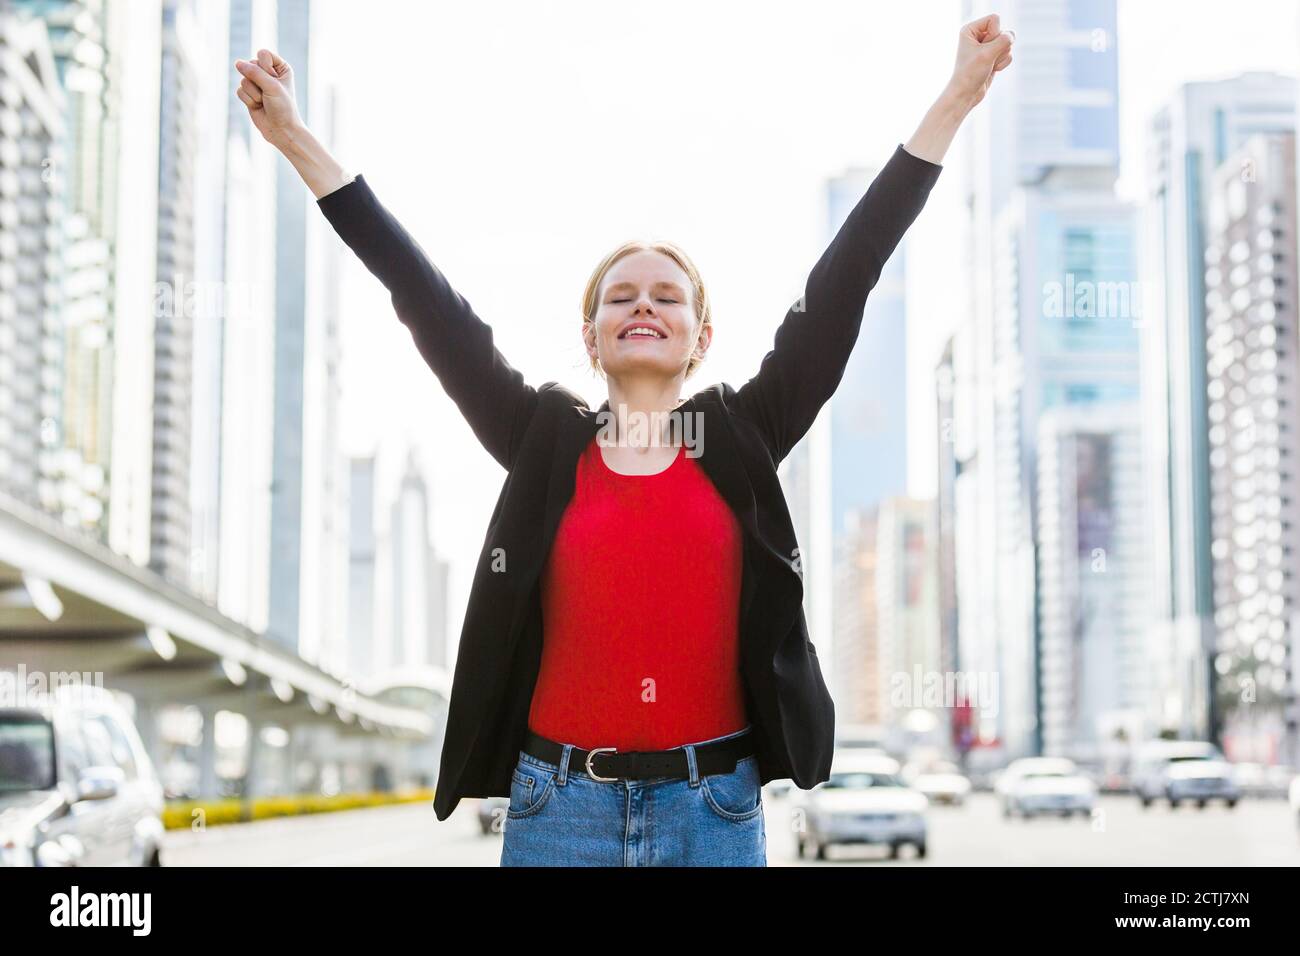 Business and career success. Happy businesswoman celebrating her work achievements in the city. Stock Photo